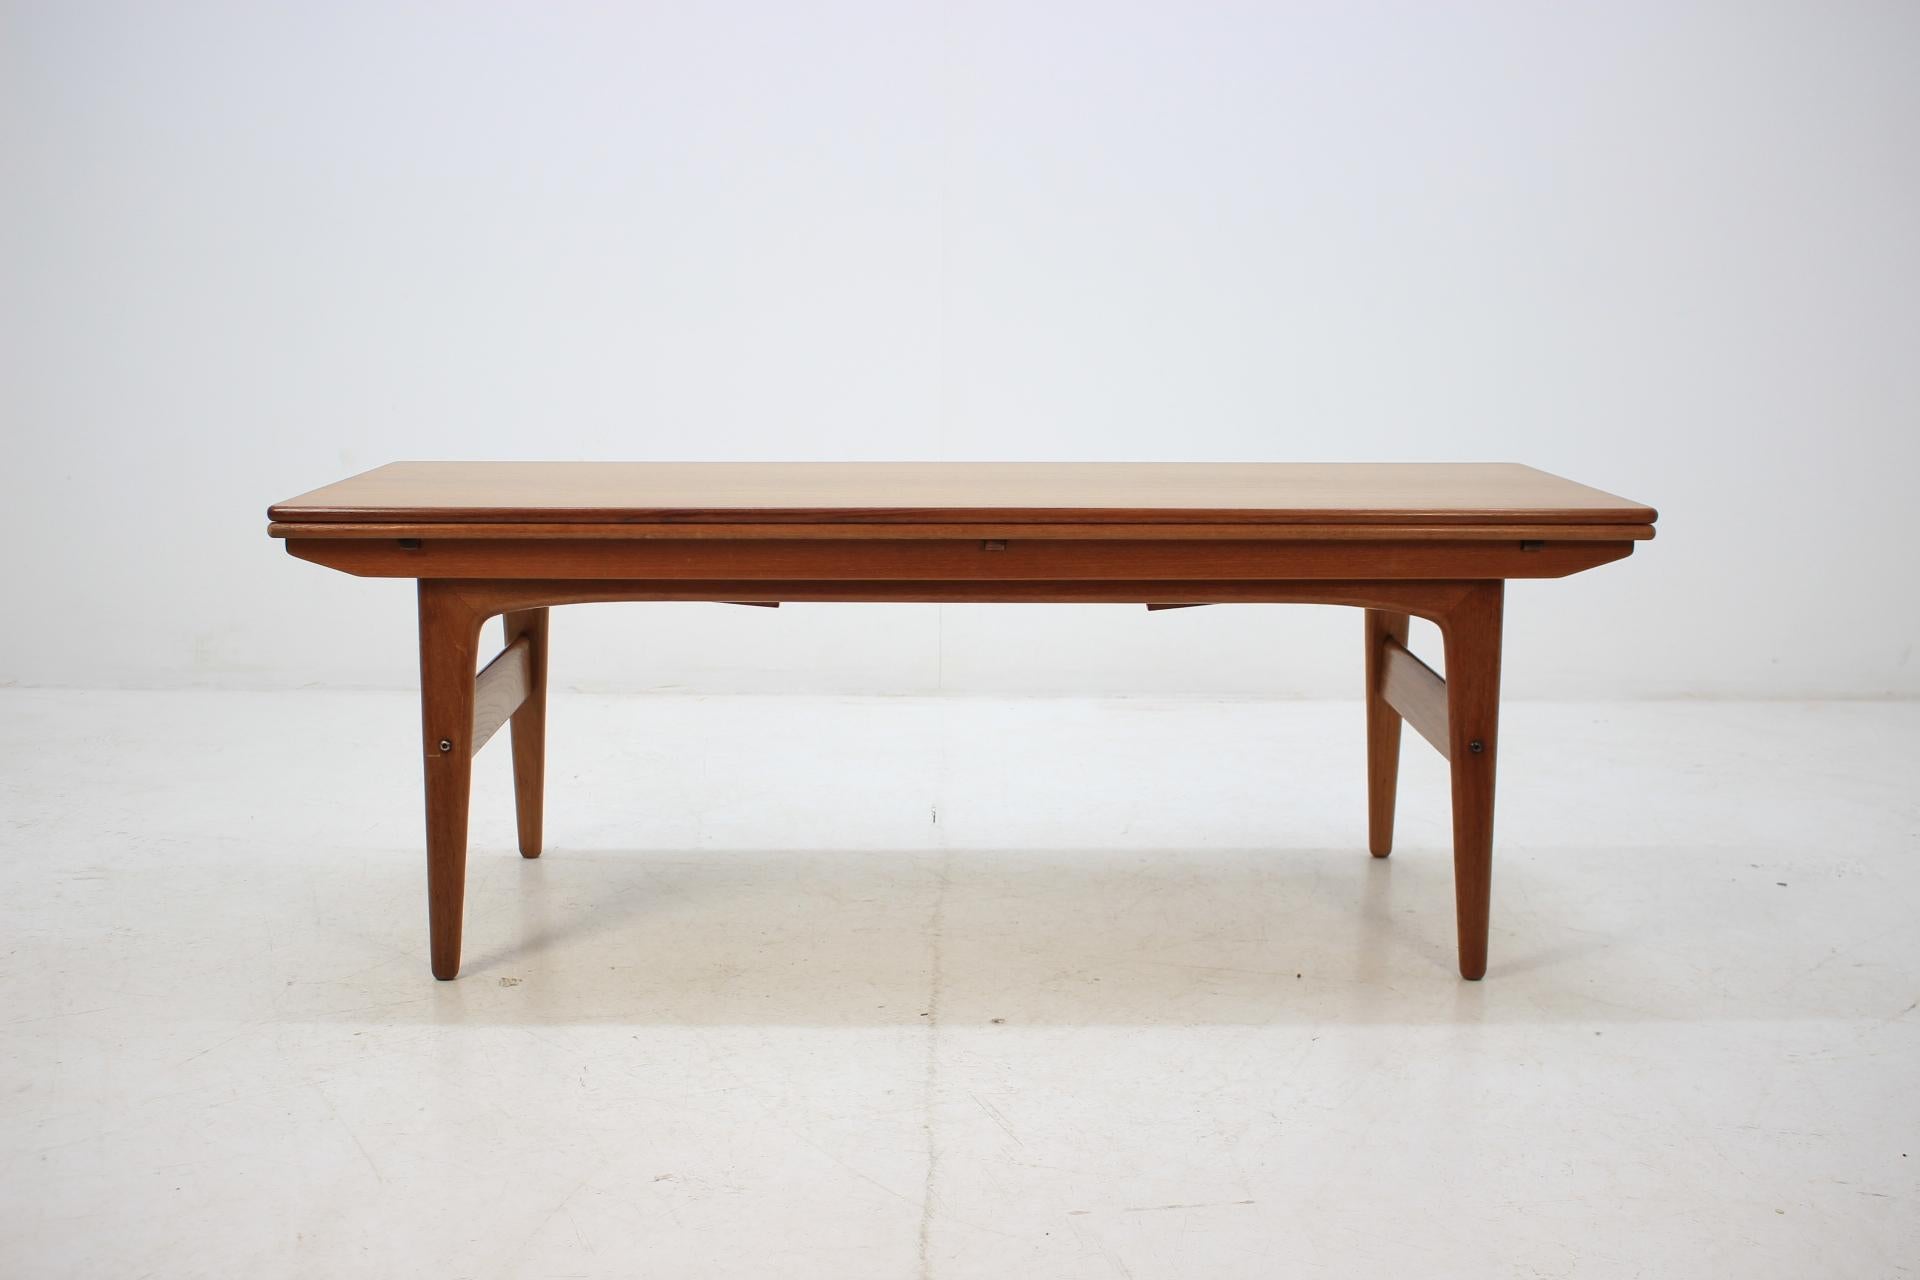 This space saving piece can be raised and also used as a small dining table. Can be raised to 73 cm and expand to 91 cm. This item was carefully restored.